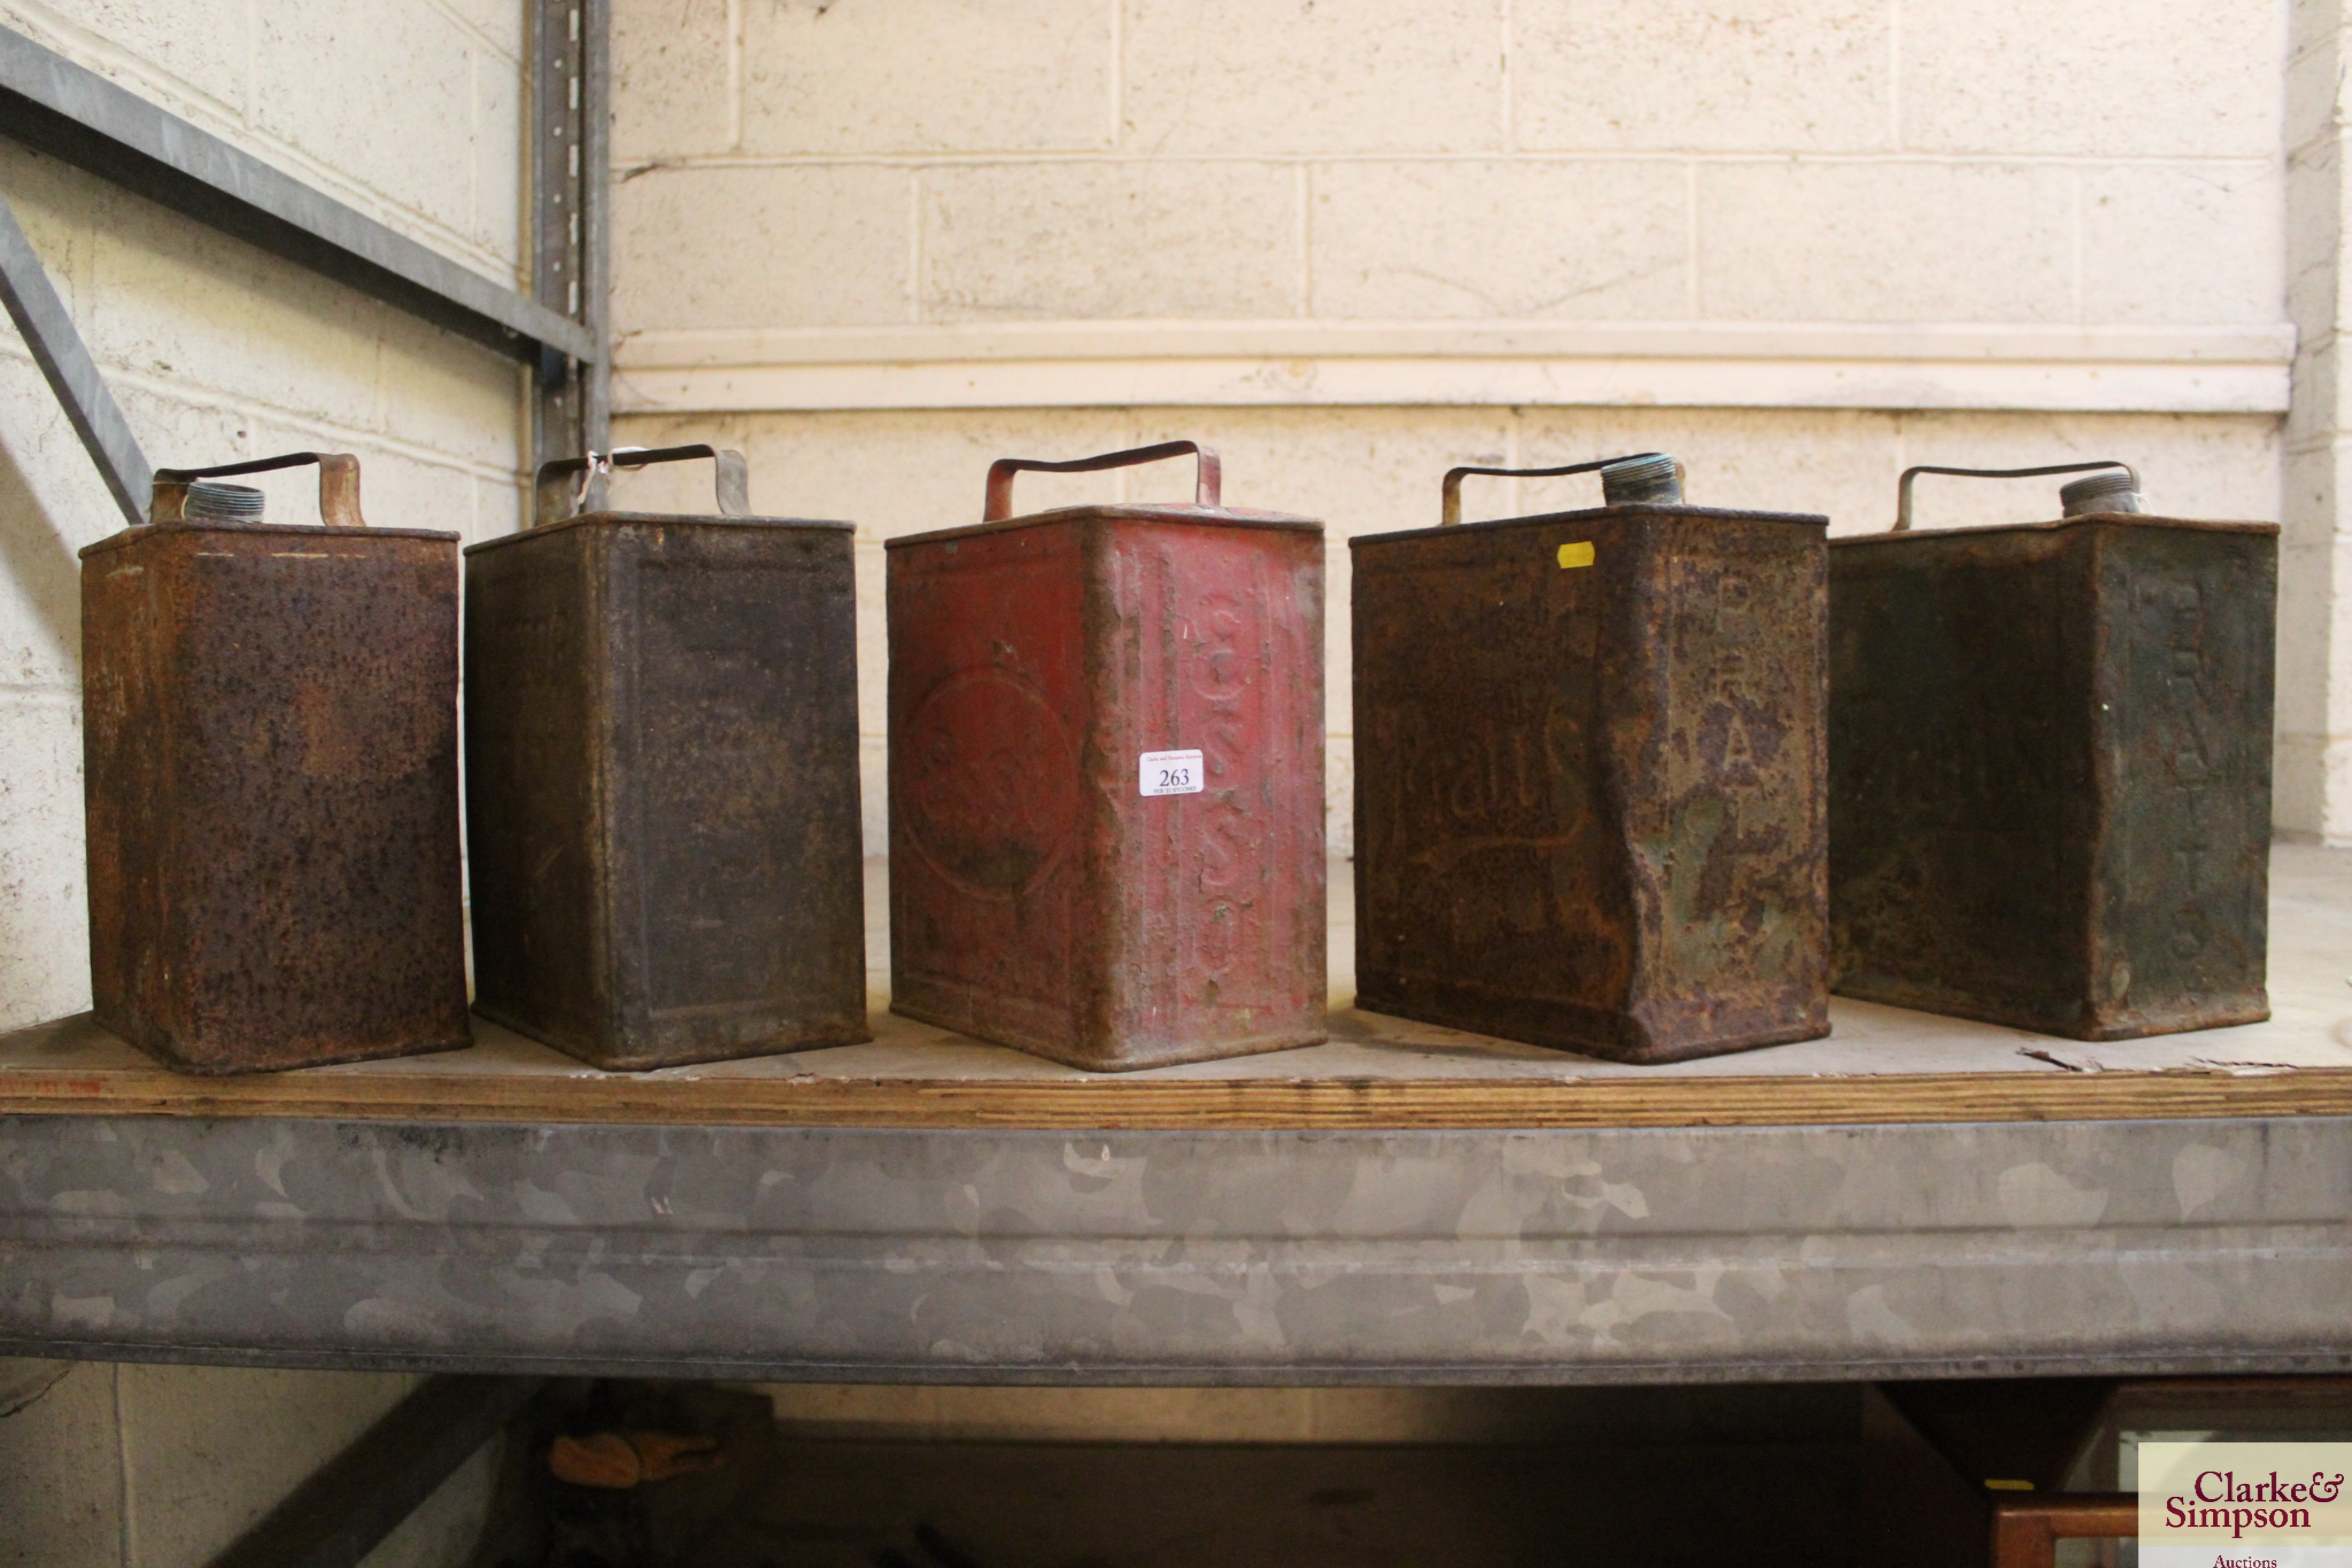 Five various two gallon petrol cans including Esso